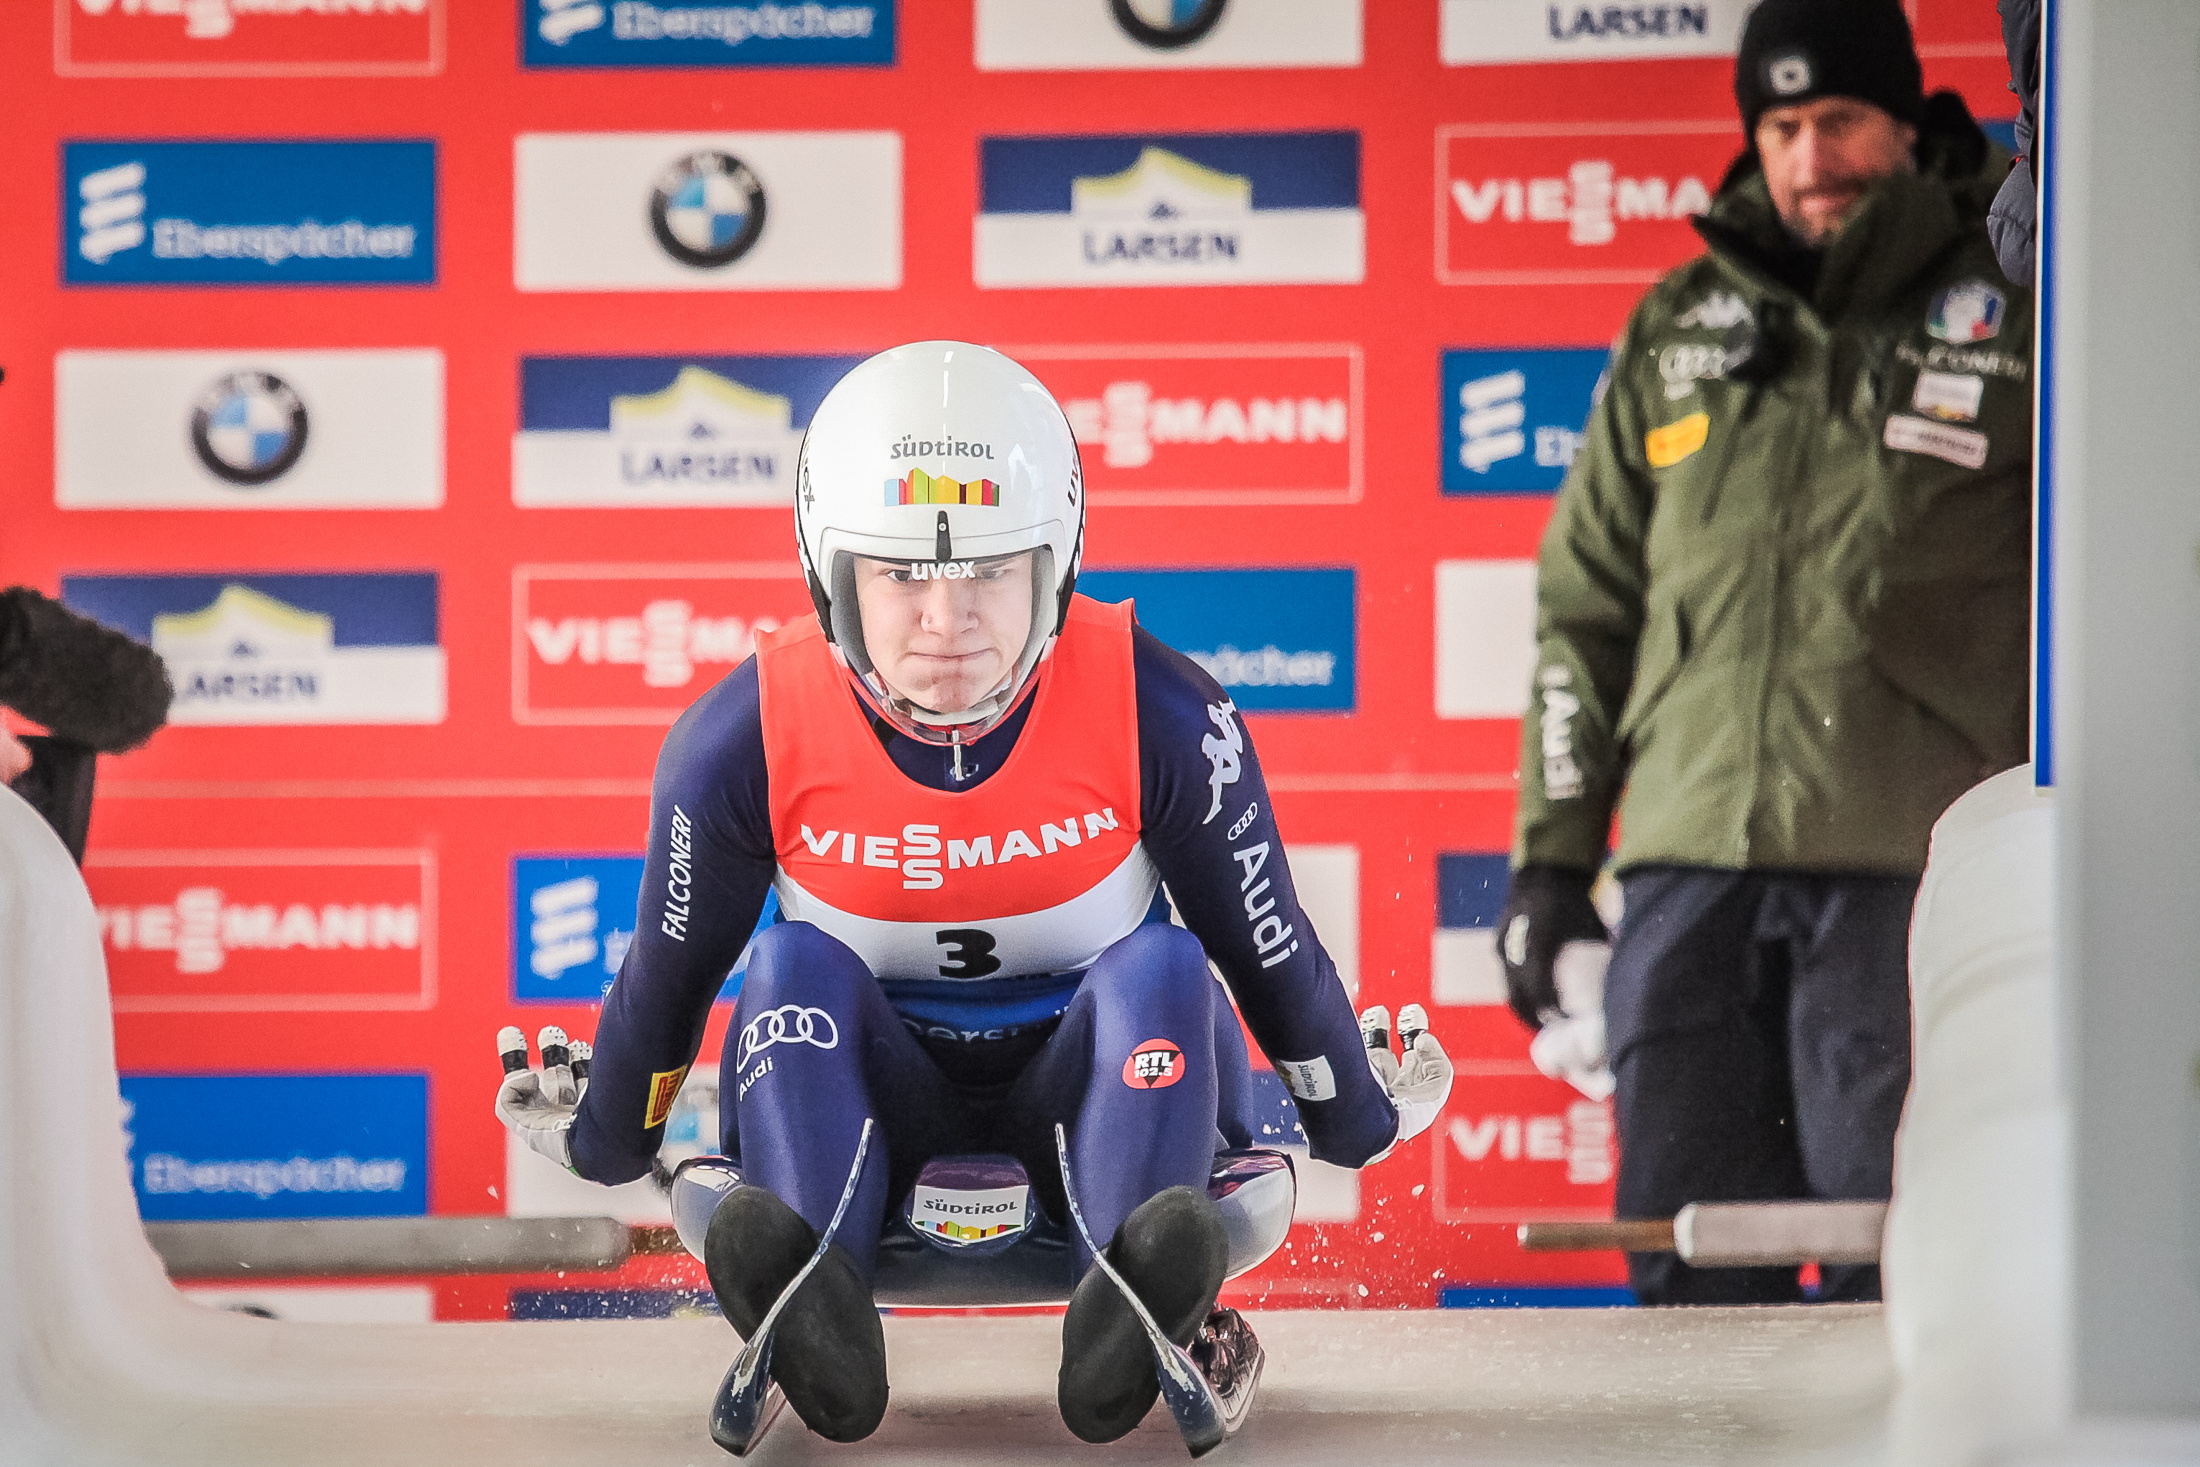 Luge: A professional luger competes at The Luge World Cup in Yanqing, An international winter sport. 2200x1470 HD Wallpaper.